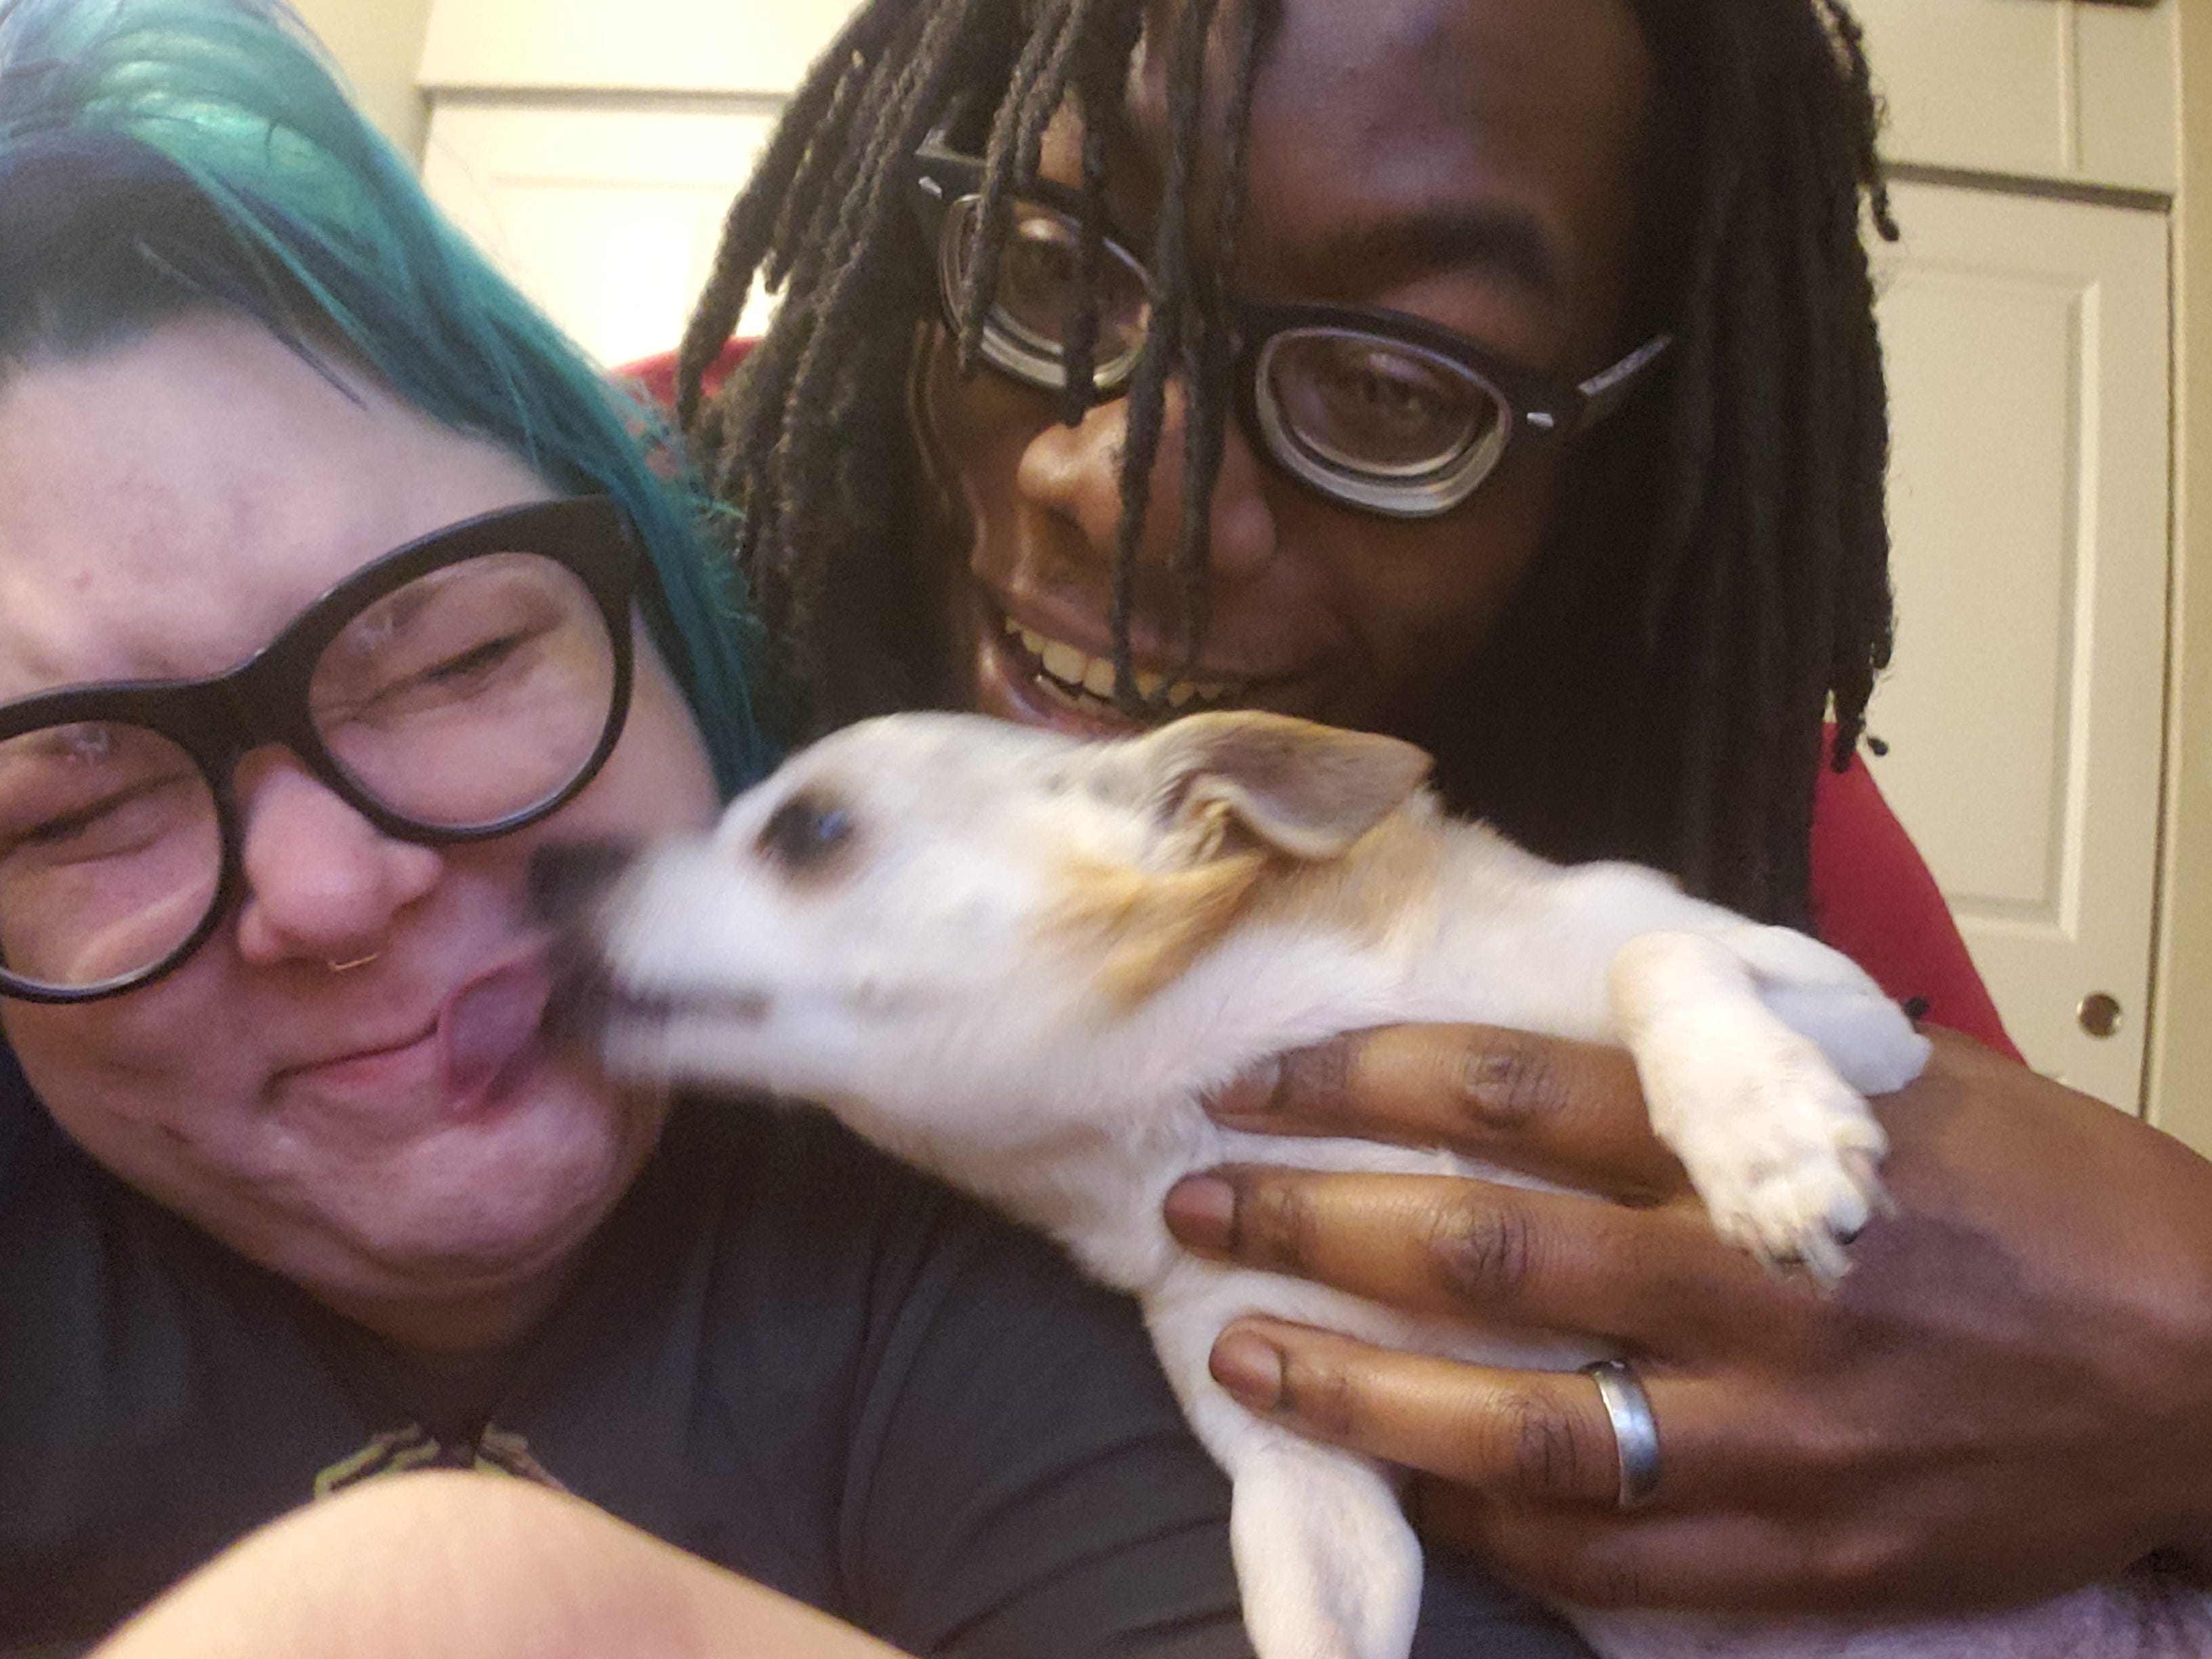 "He was emotional support for me," said Jess, pictured here with Marty and her husband Jon. "When I was having a bad time, he would crawl up on me and lick my face which I don't even like, but I liked it when he did it."